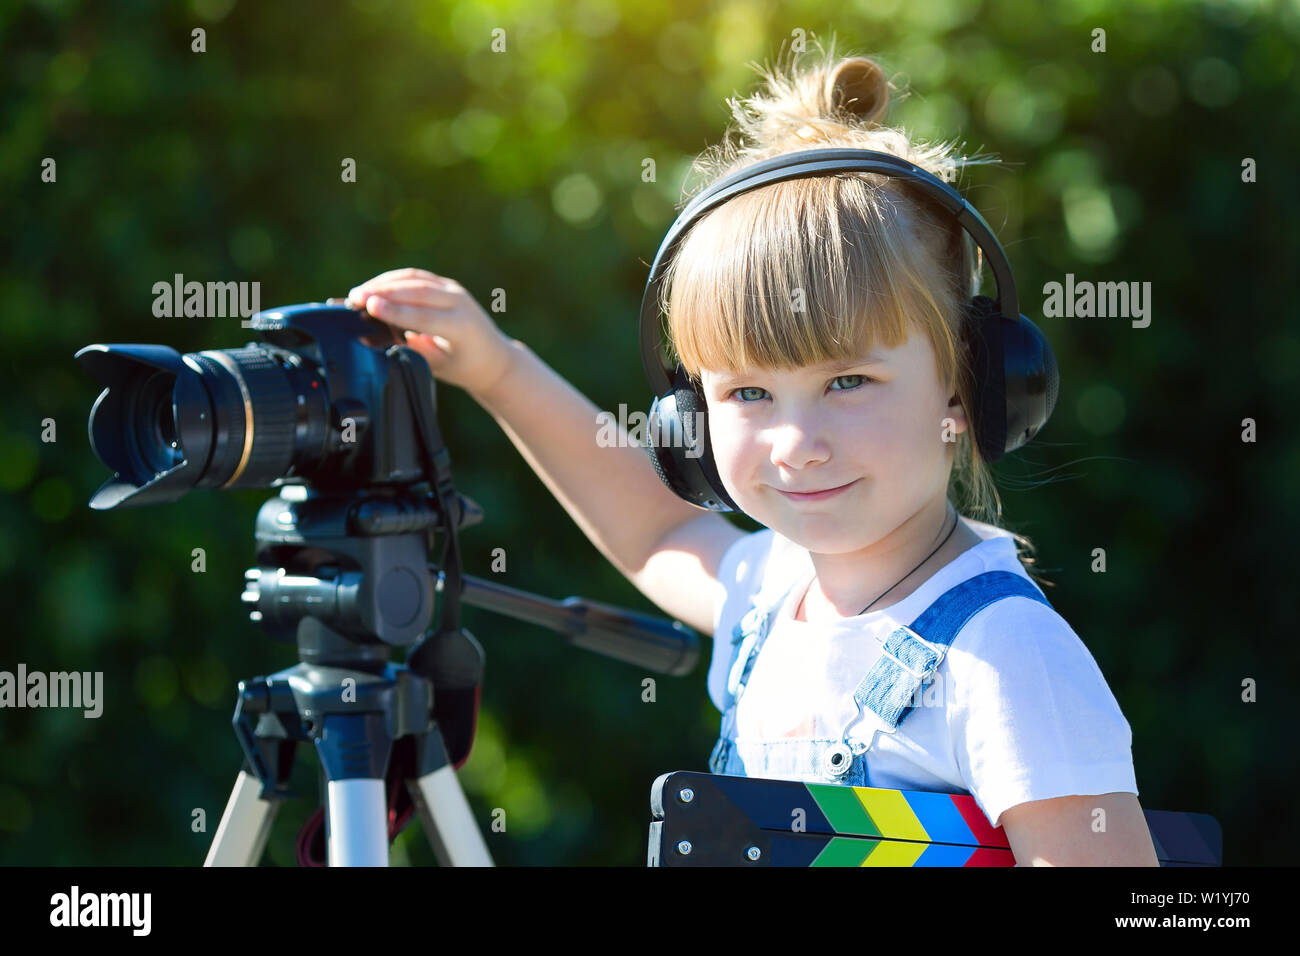 A little girl in headphones with a TV numerator in her hands is standing next camera on a tripod. Stock Photo